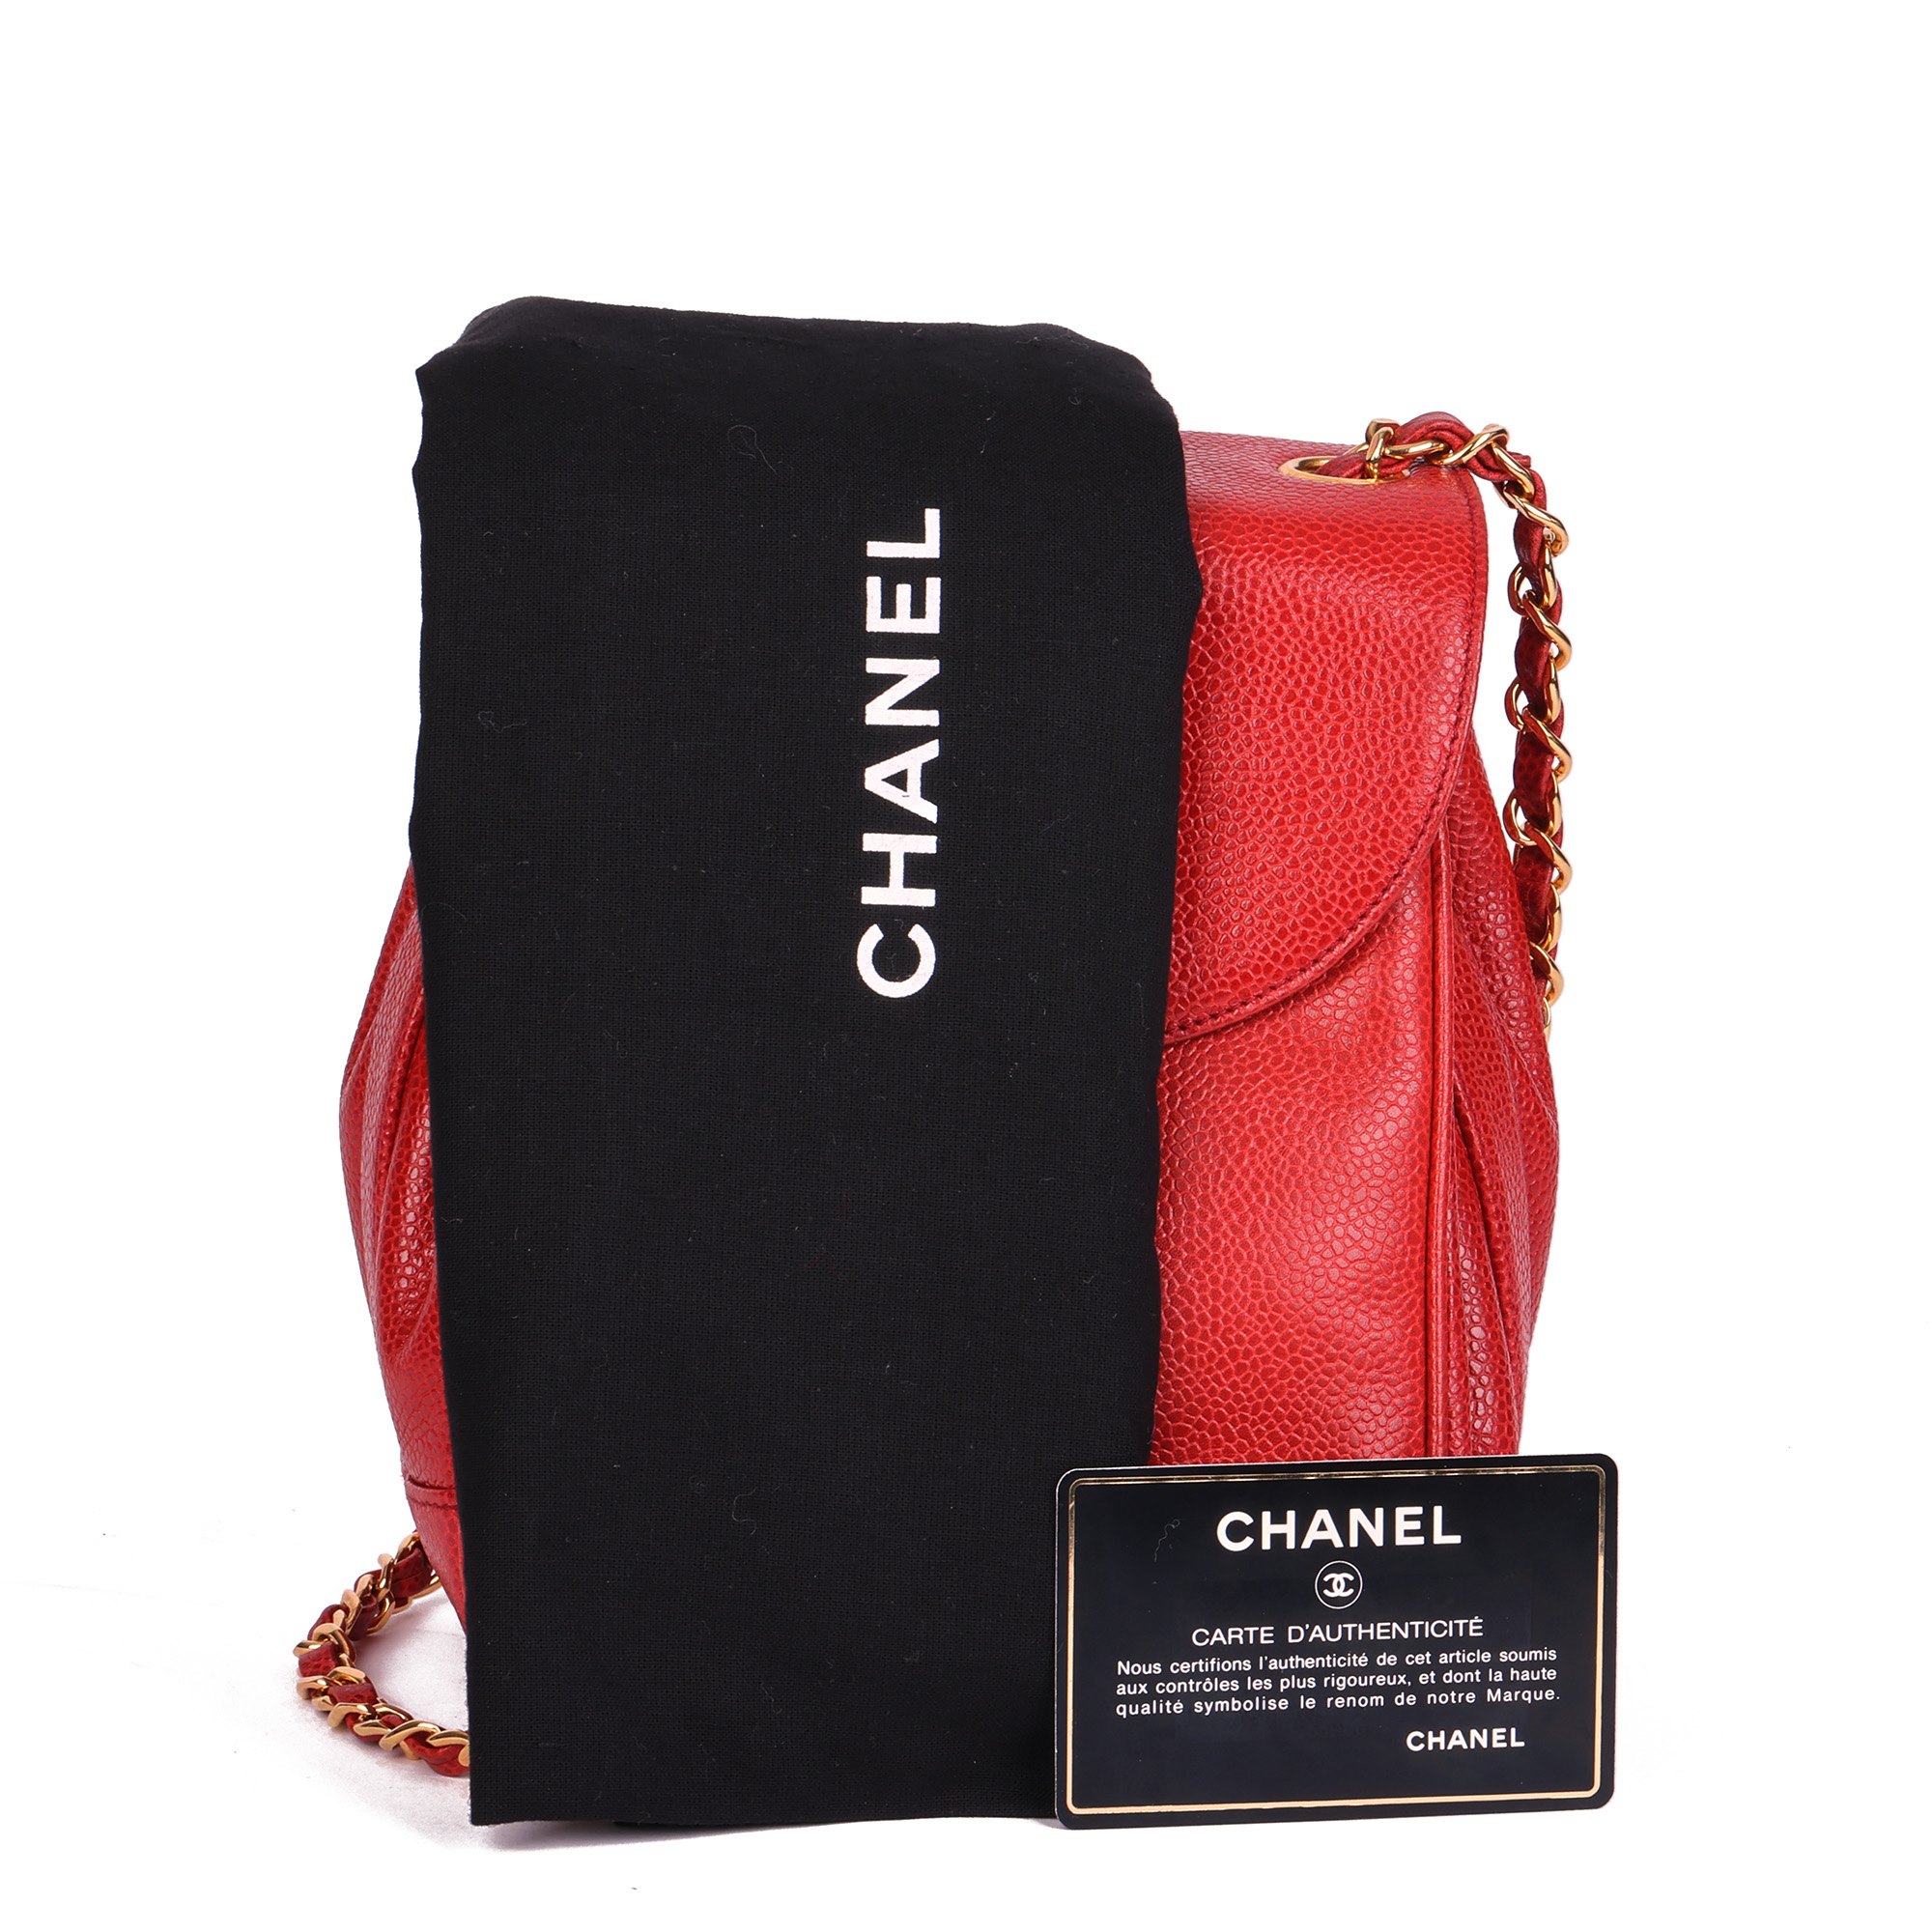 Chanel Red Caviar Leather Vintage XL Classic Single Flap Bag